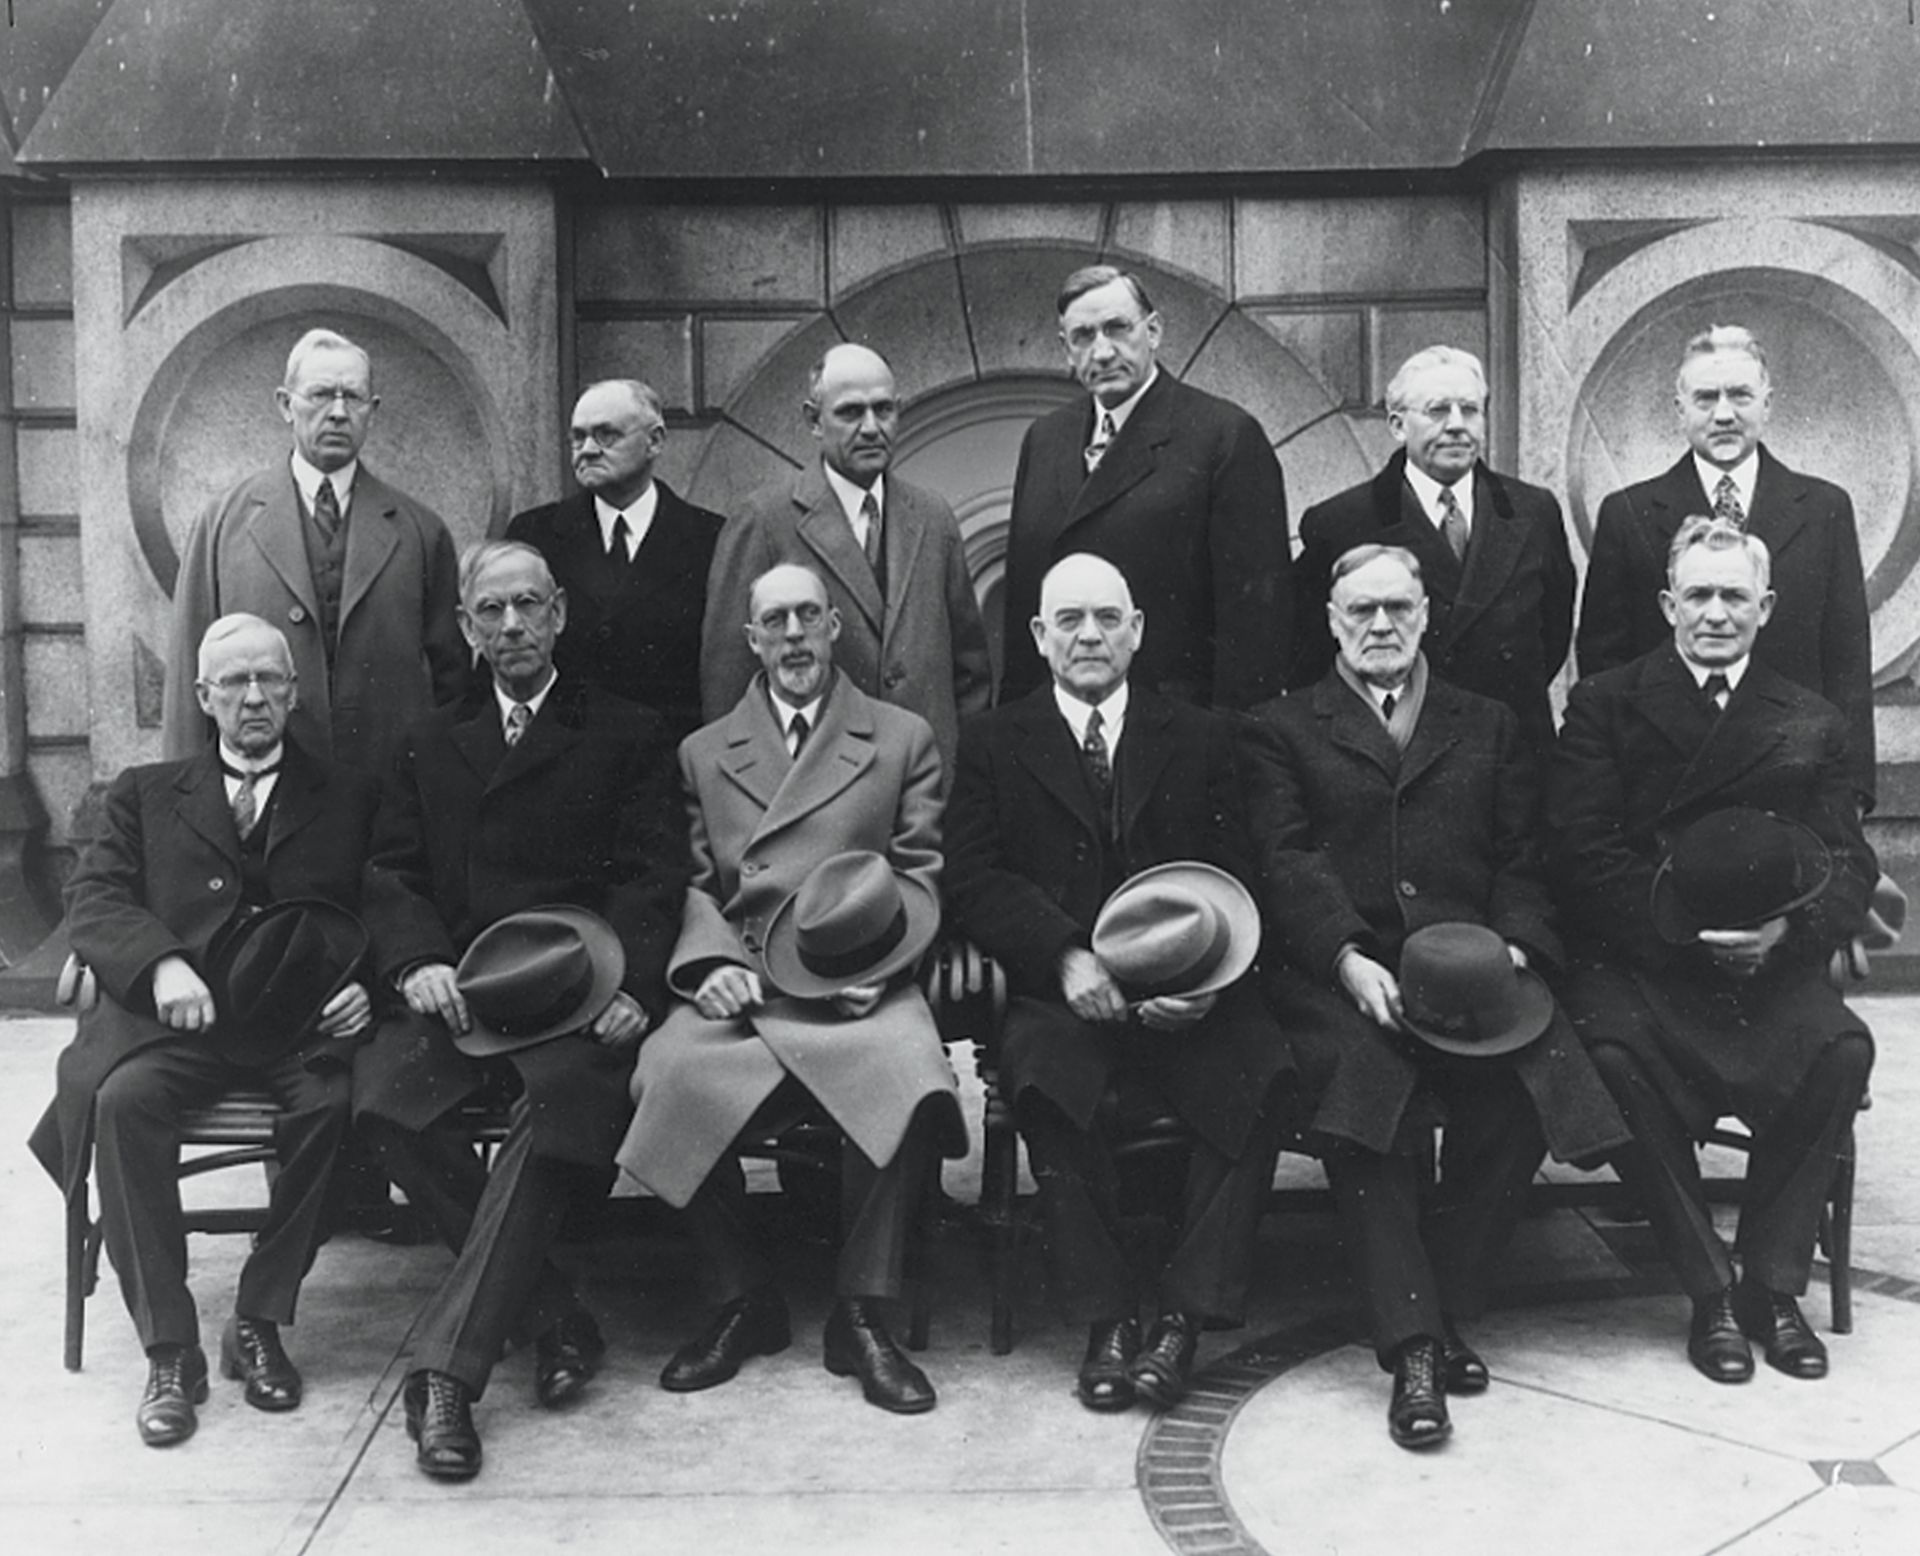 The Quorum of the Twelve Apostles in 1921. Standing, left to right: Joseph Fielding Smith, James E. Talmage, Stephen L Richards, Richard R. Lyman, Melvin J. Ballard, and John A. Widtsoe. Seated, left to right: Rudger Clawson, Reed Smoot, George Albert Smith, George F. Richards, Orson F. Whitney, and David O. McKay. Teachings of Presidents of the Church: George Albert Smith (2011), xx